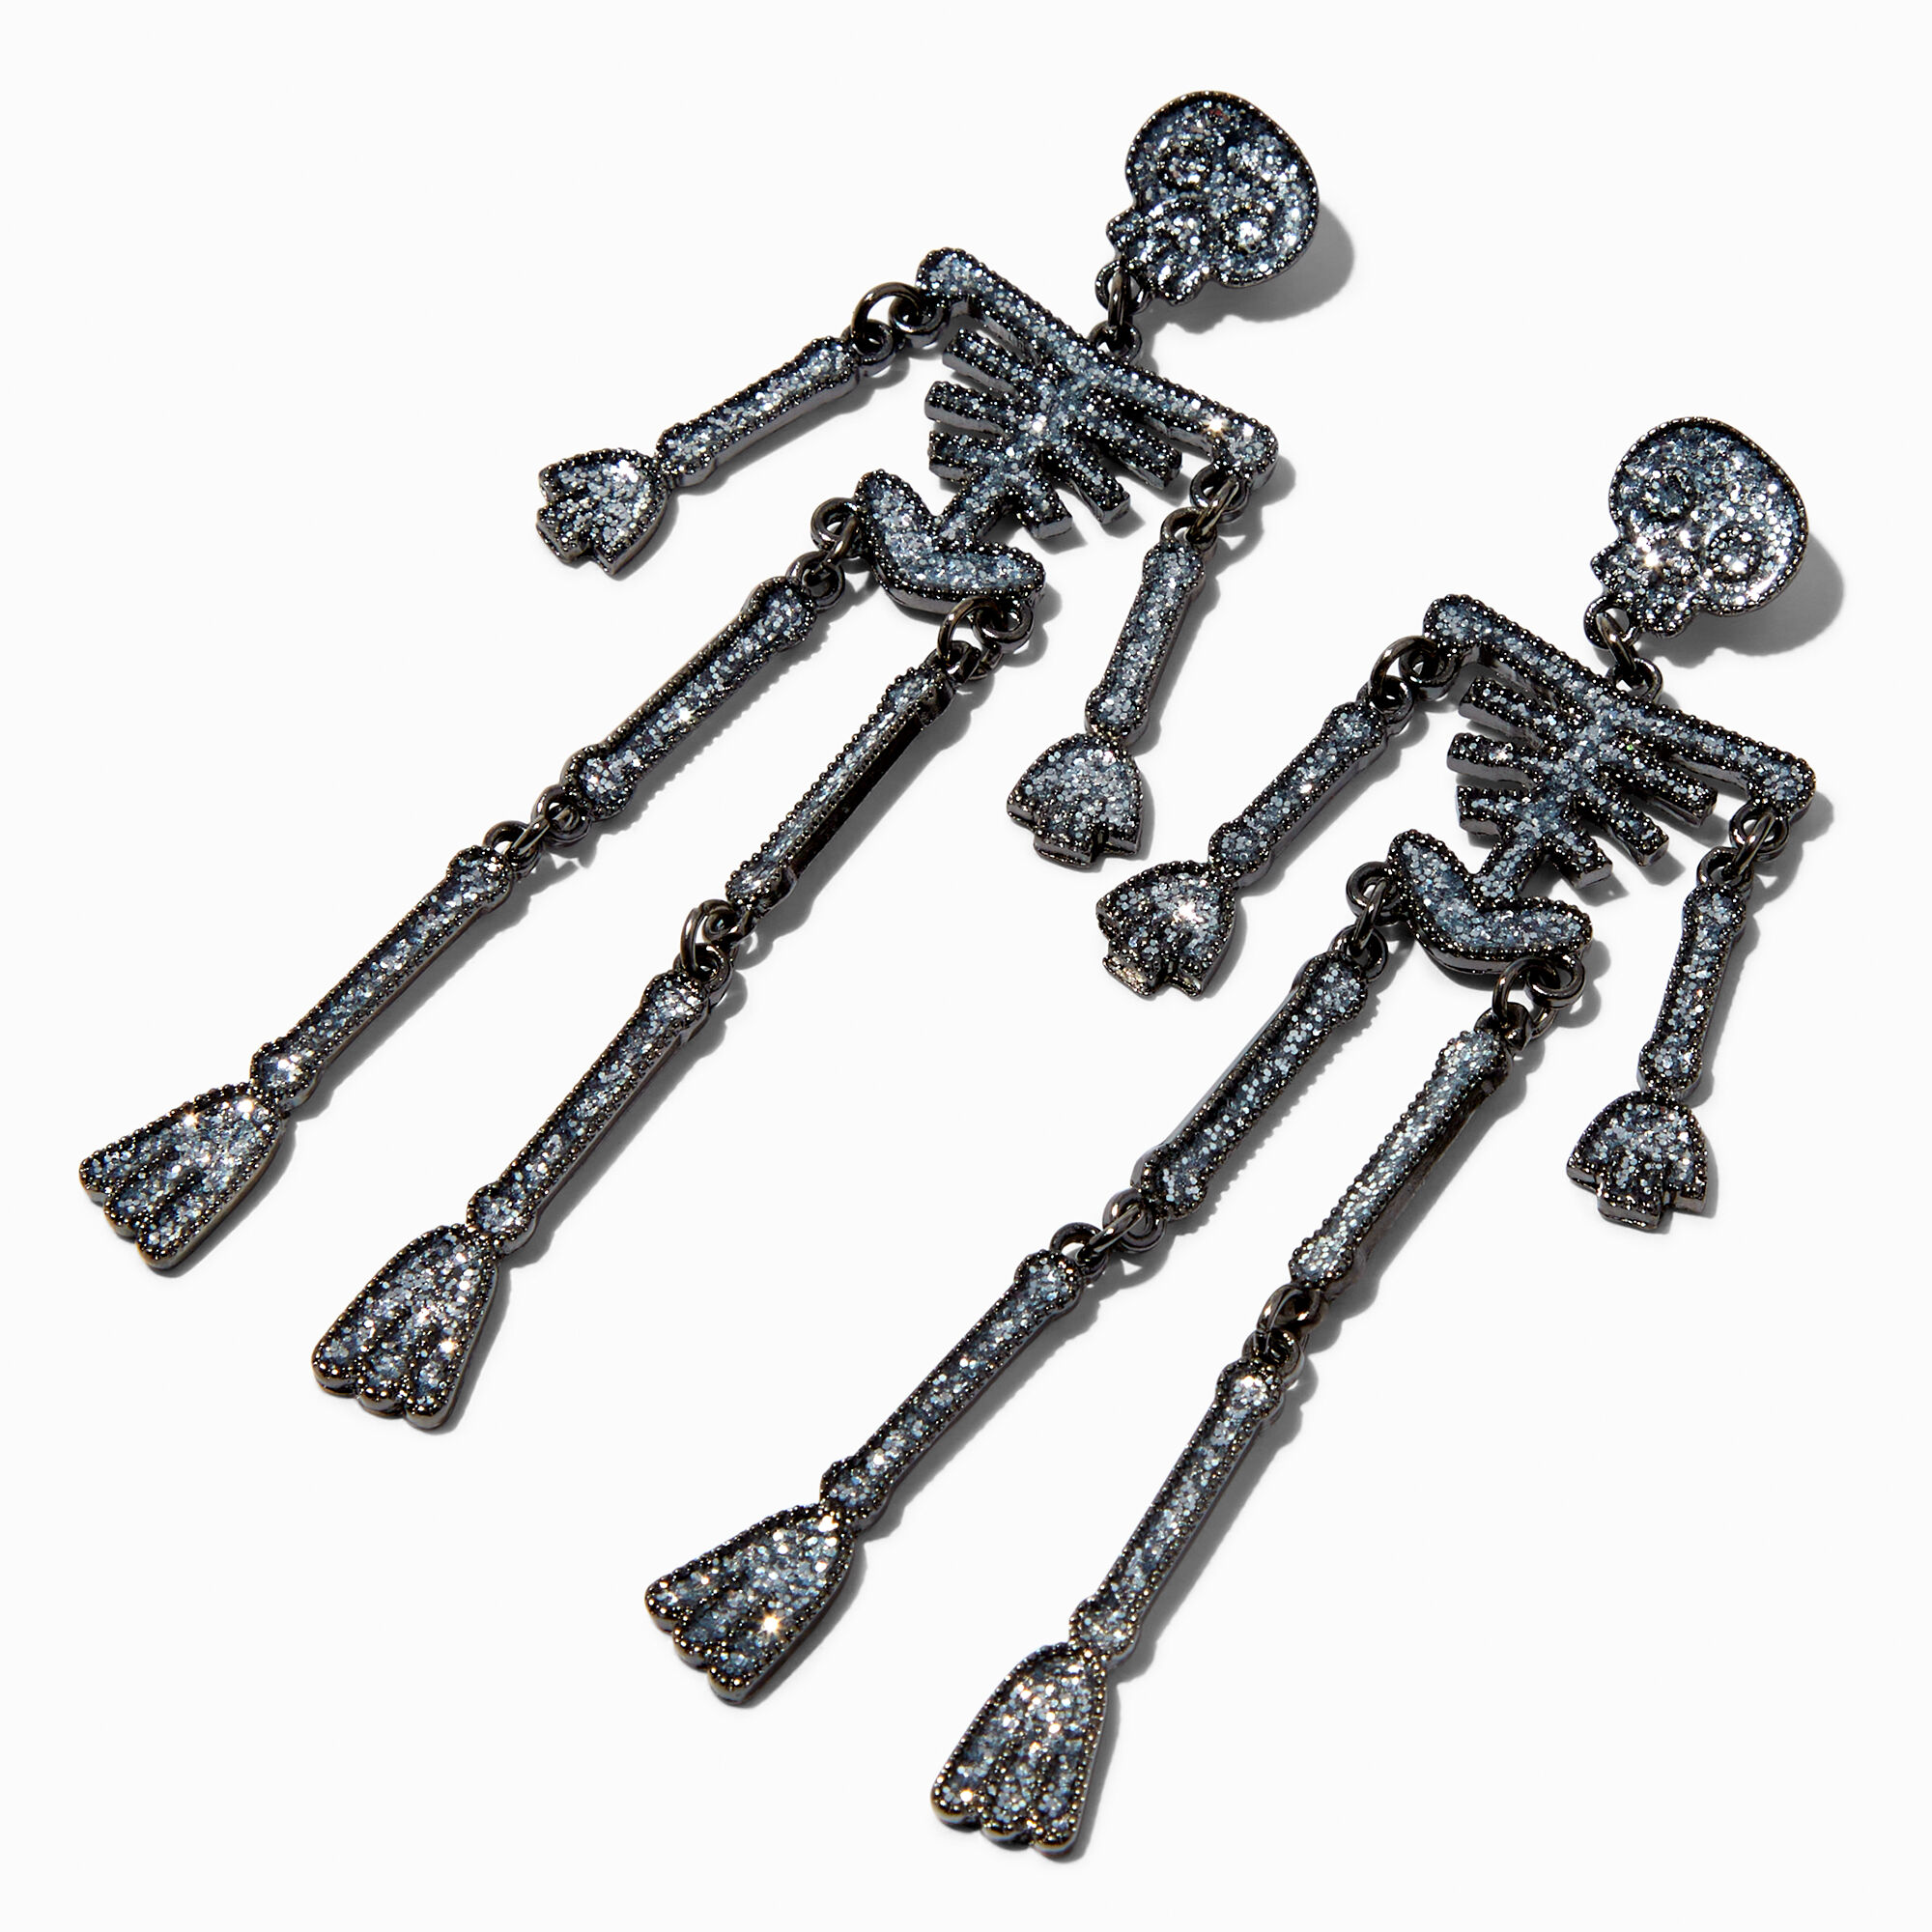 View Claires Glittery Jointed Skeleton 4 Drop Earrings information